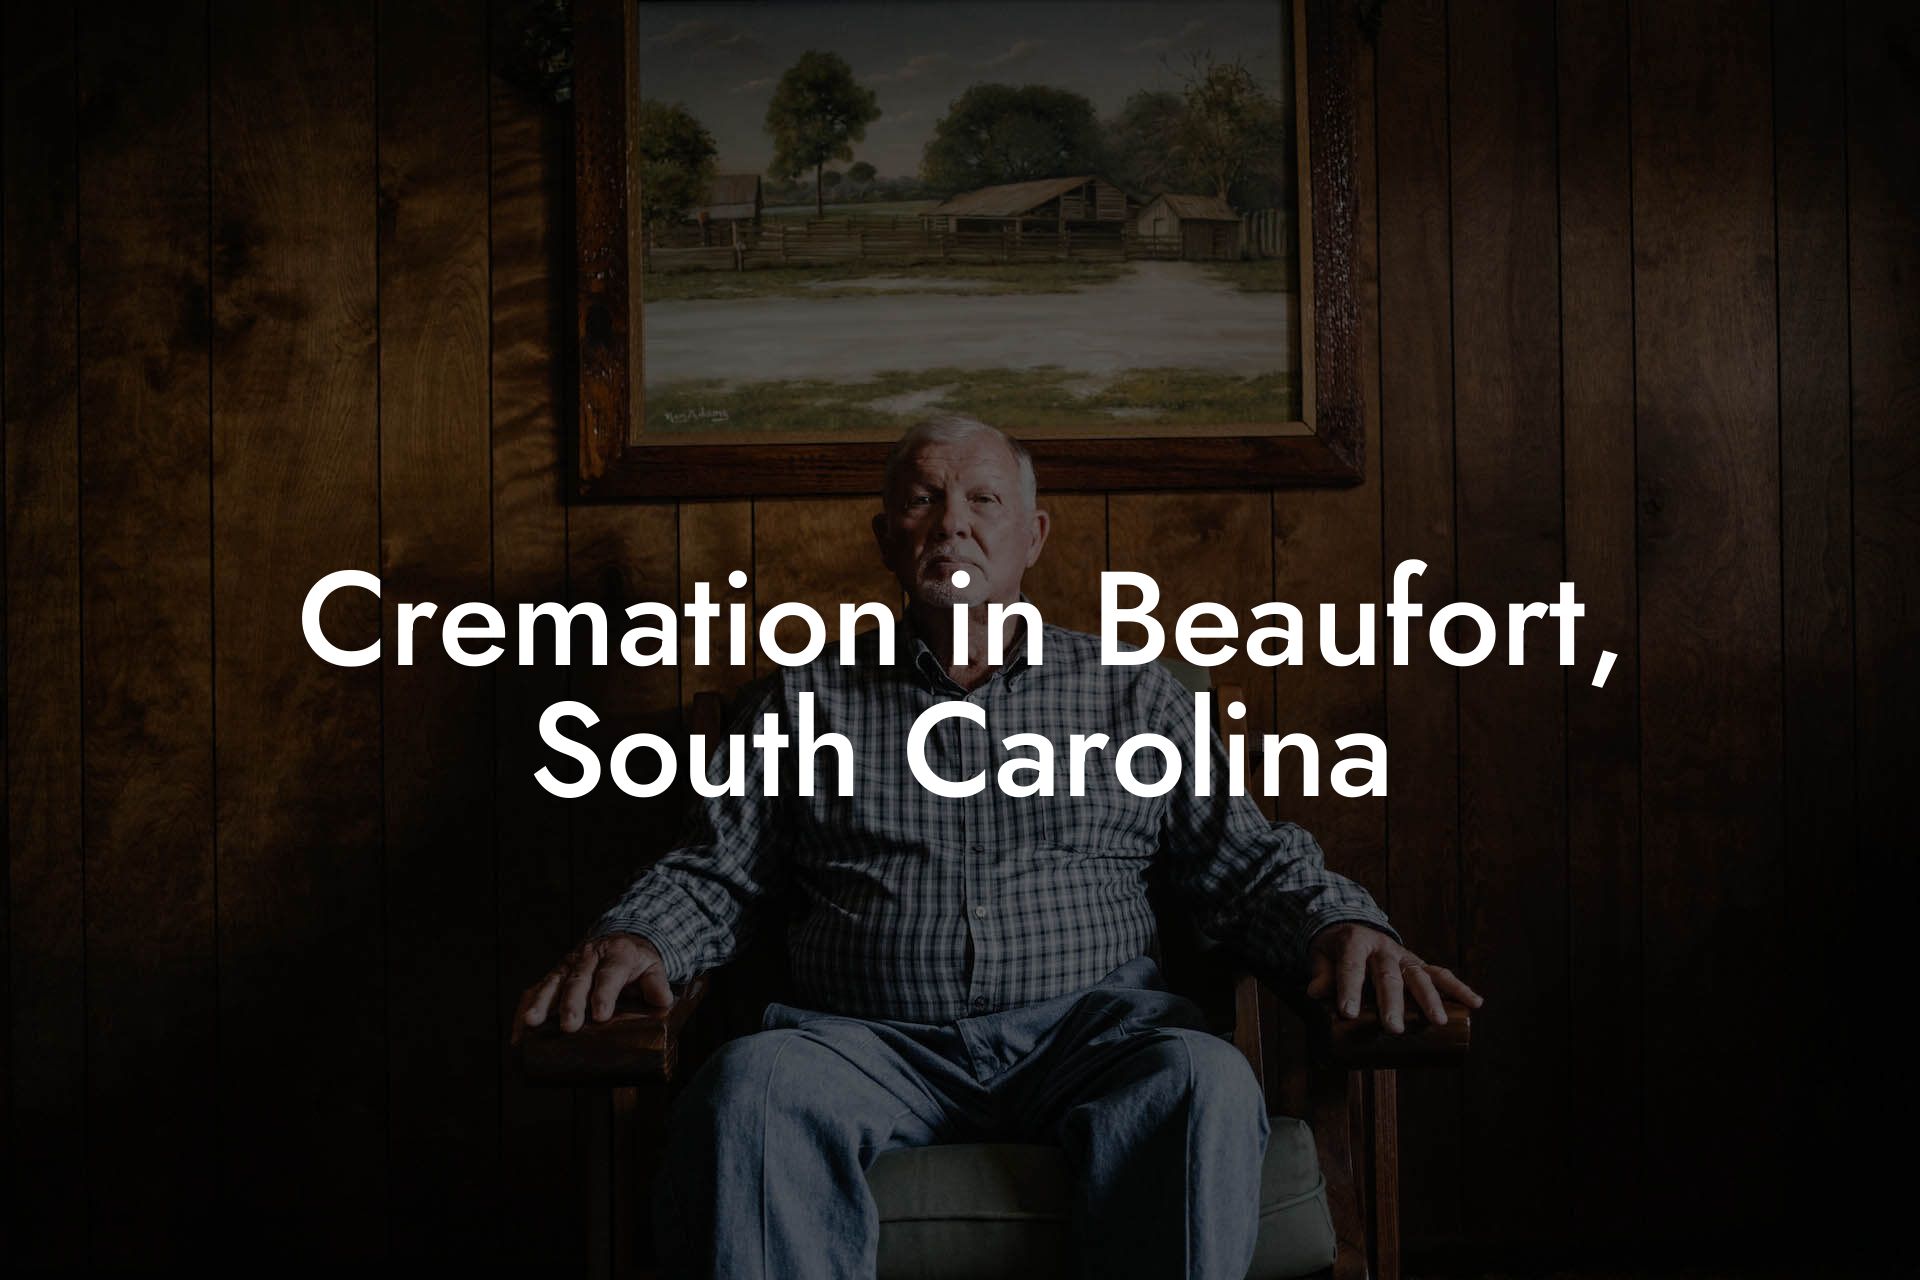 Cremation in Beaufort, South Carolina